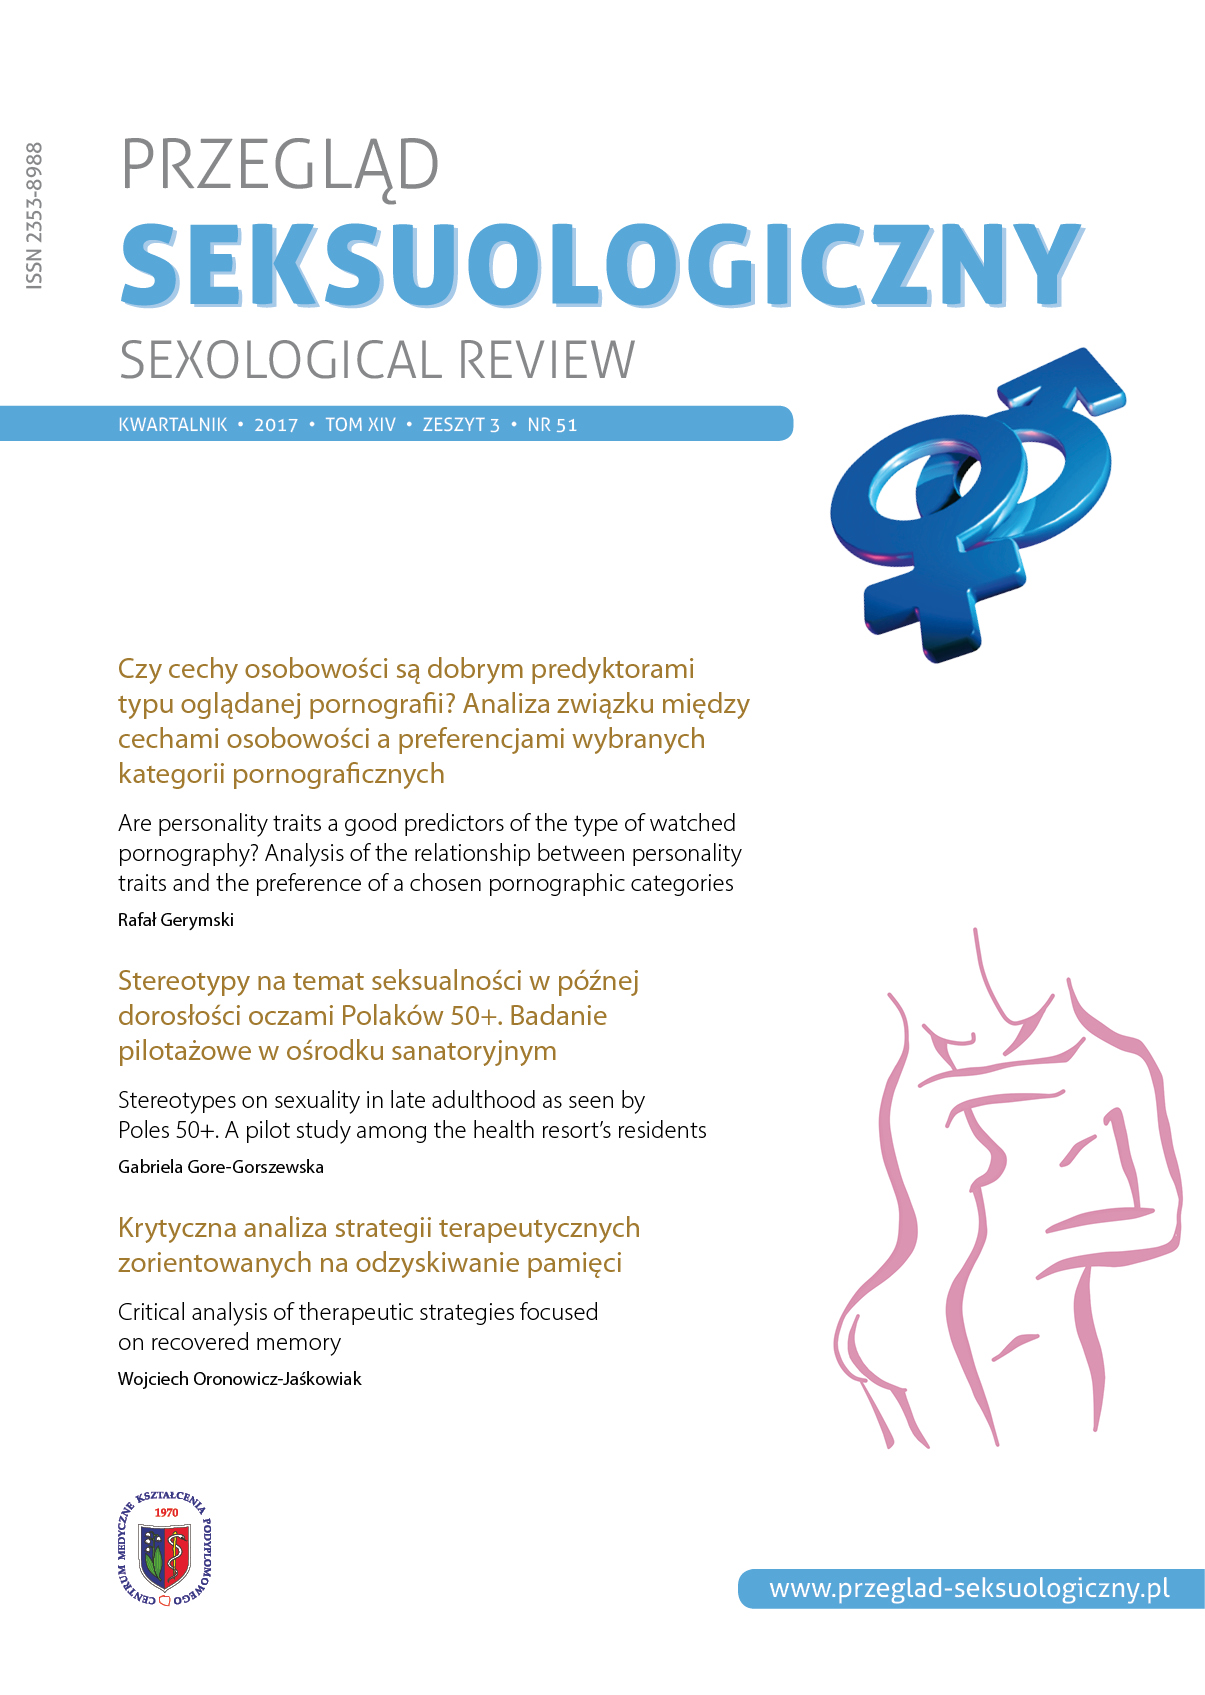 Are the personality traits a good predictors of the type of wtached pornography? Analysis of the relationship between personality traits and the preference of the chosen pornographic categories. Cover Image